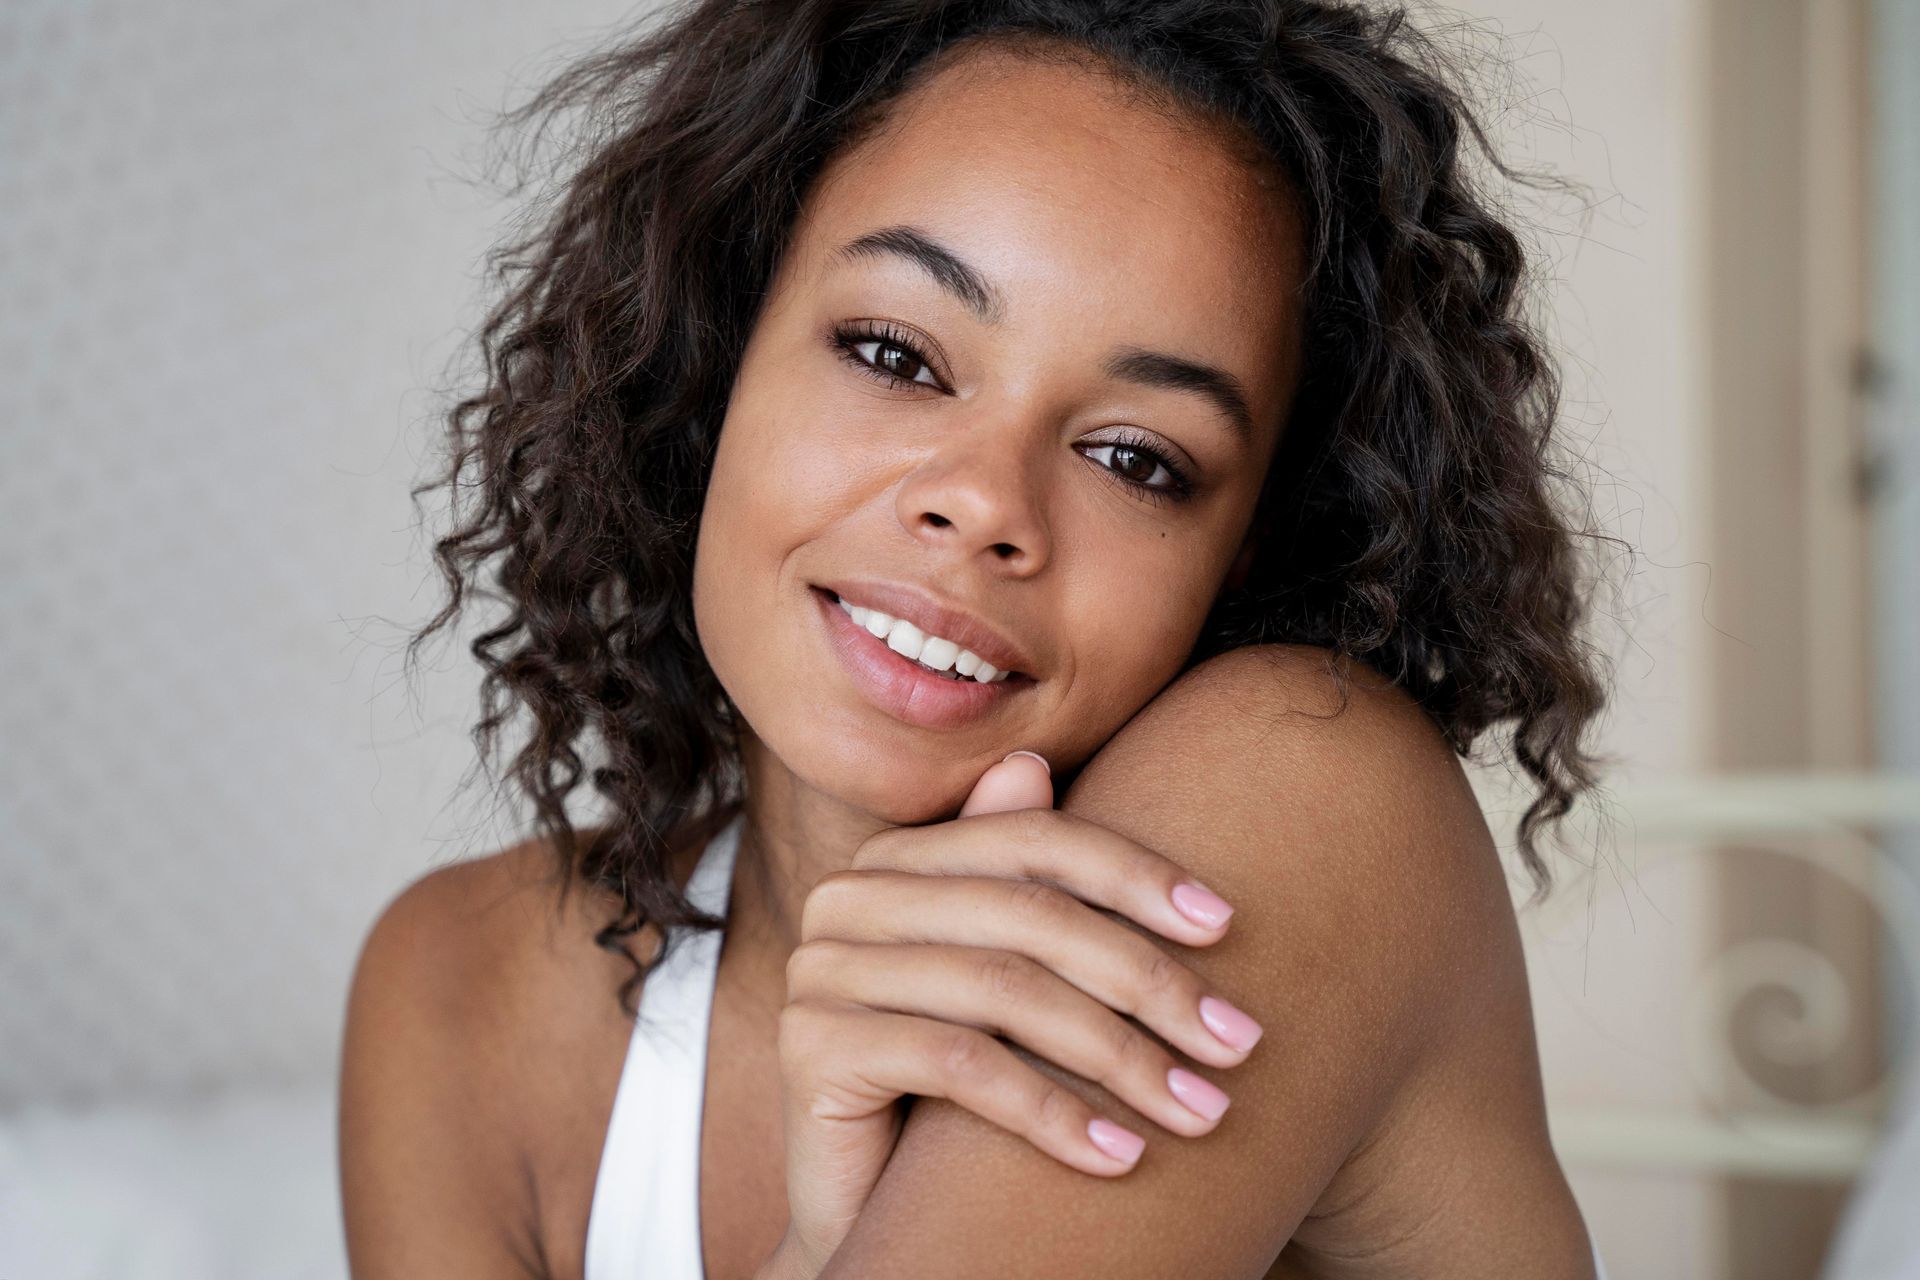 A woman with curly hair is smiling with her hands on her shoulder.